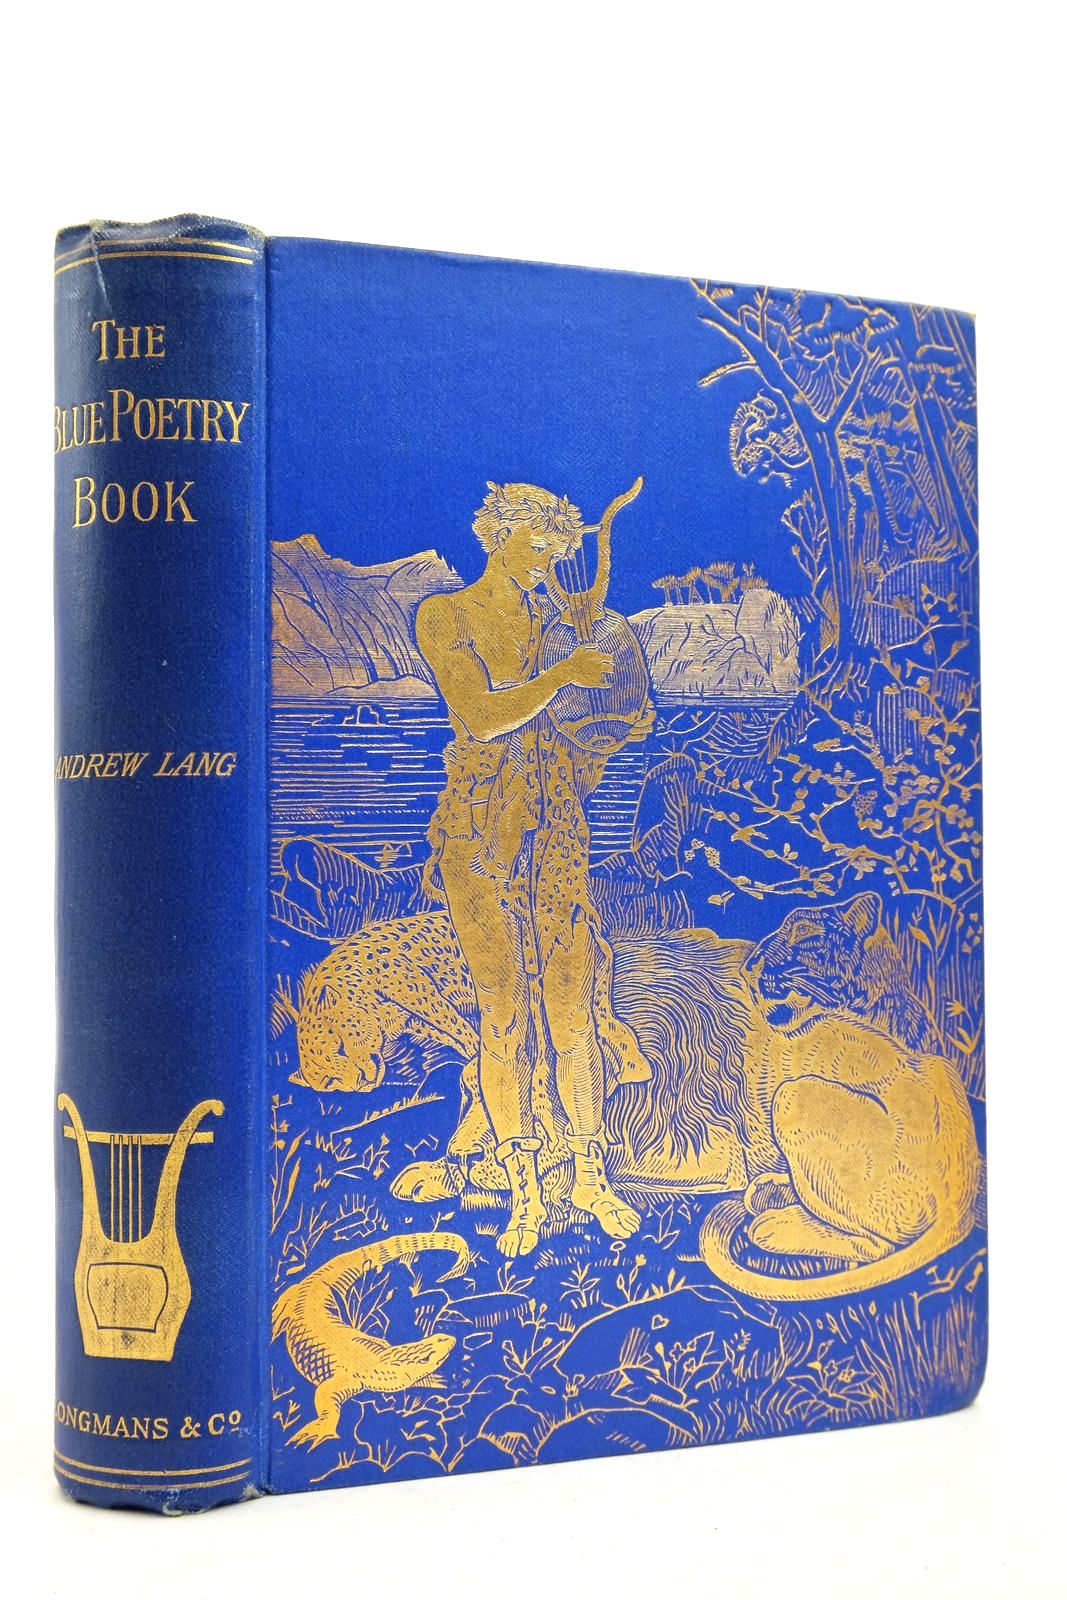 Photo of THE BLUE POETRY BOOK written by Lang, Andrew illustrated by Ford, H.J. Speed, Lancelot published by Longmans, Green &amp; Co. (STOCK CODE: 2139764)  for sale by Stella & Rose's Books